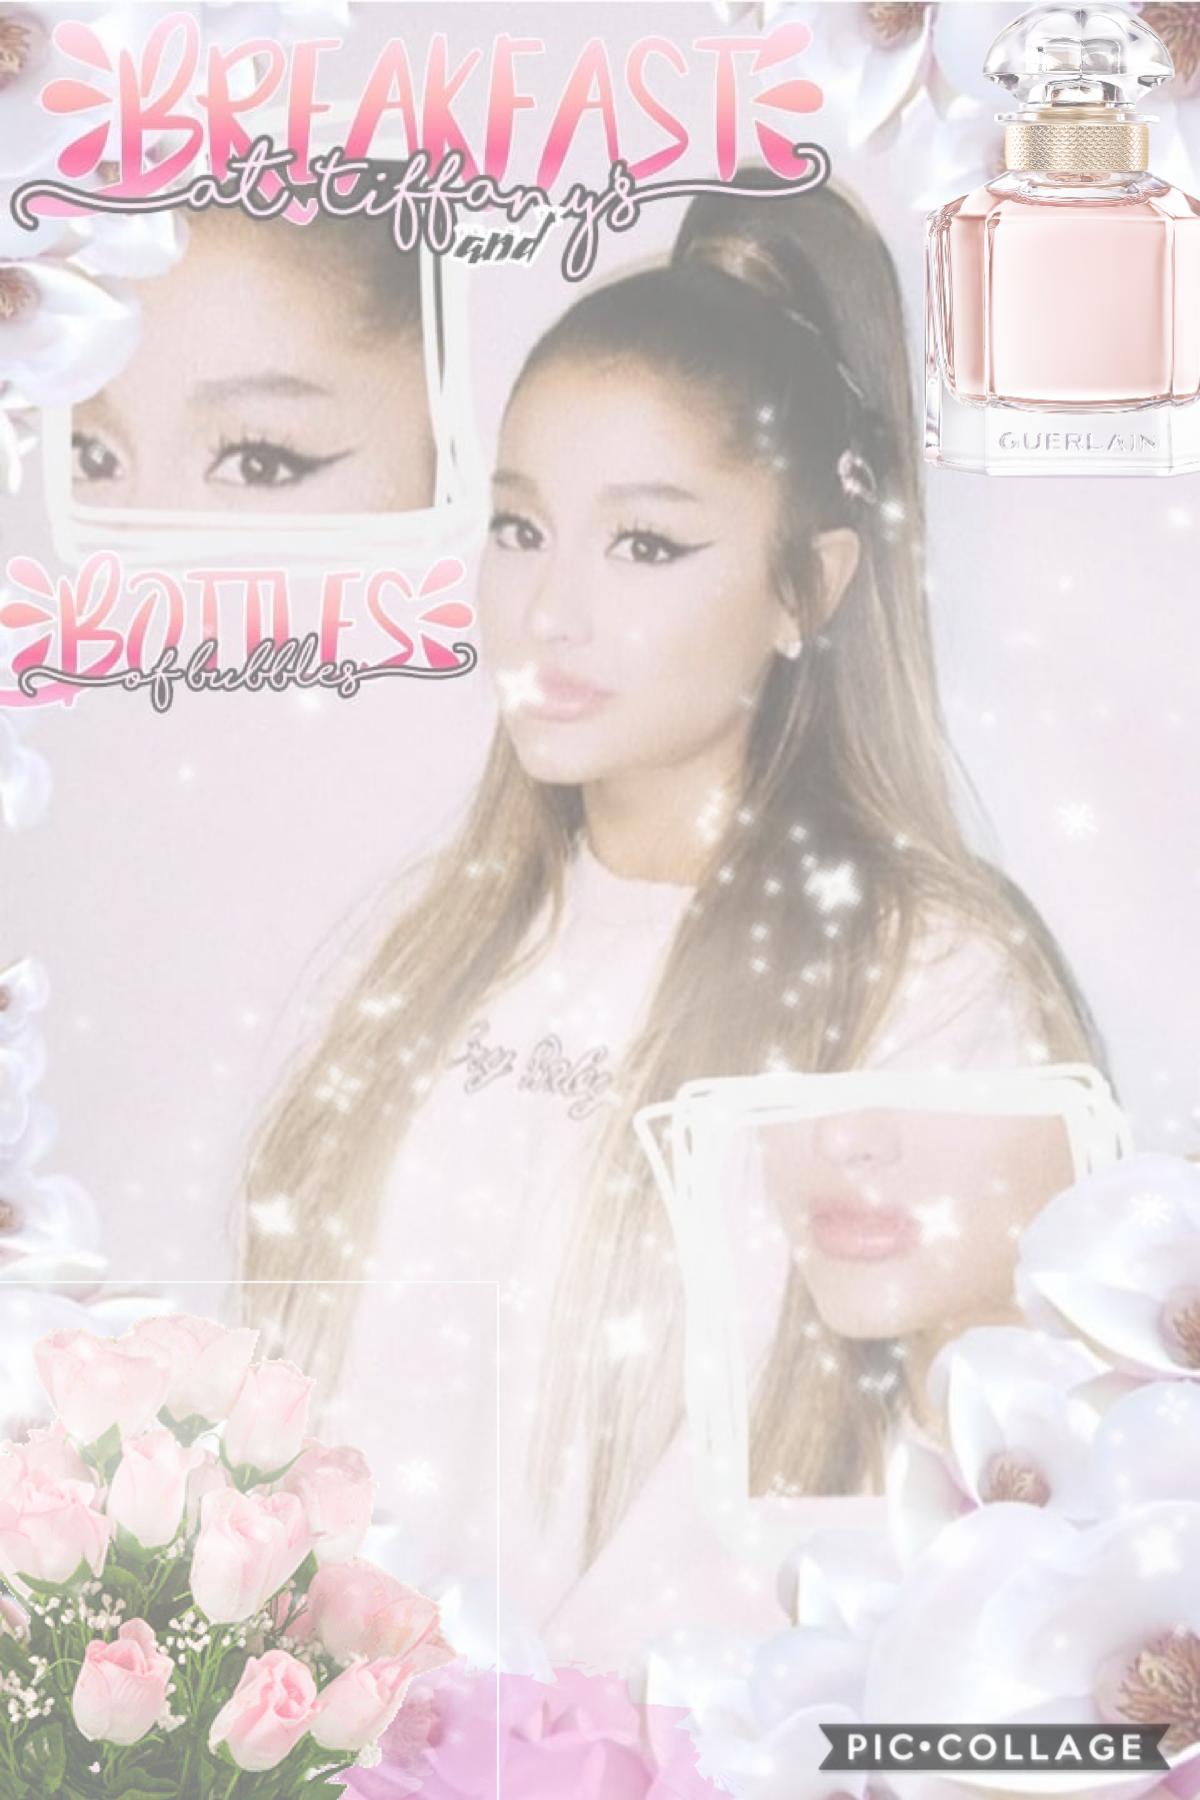 Collab with.........
XxmikaylaxX thank you for the collab pls go follow Mikayla she is amazing♡